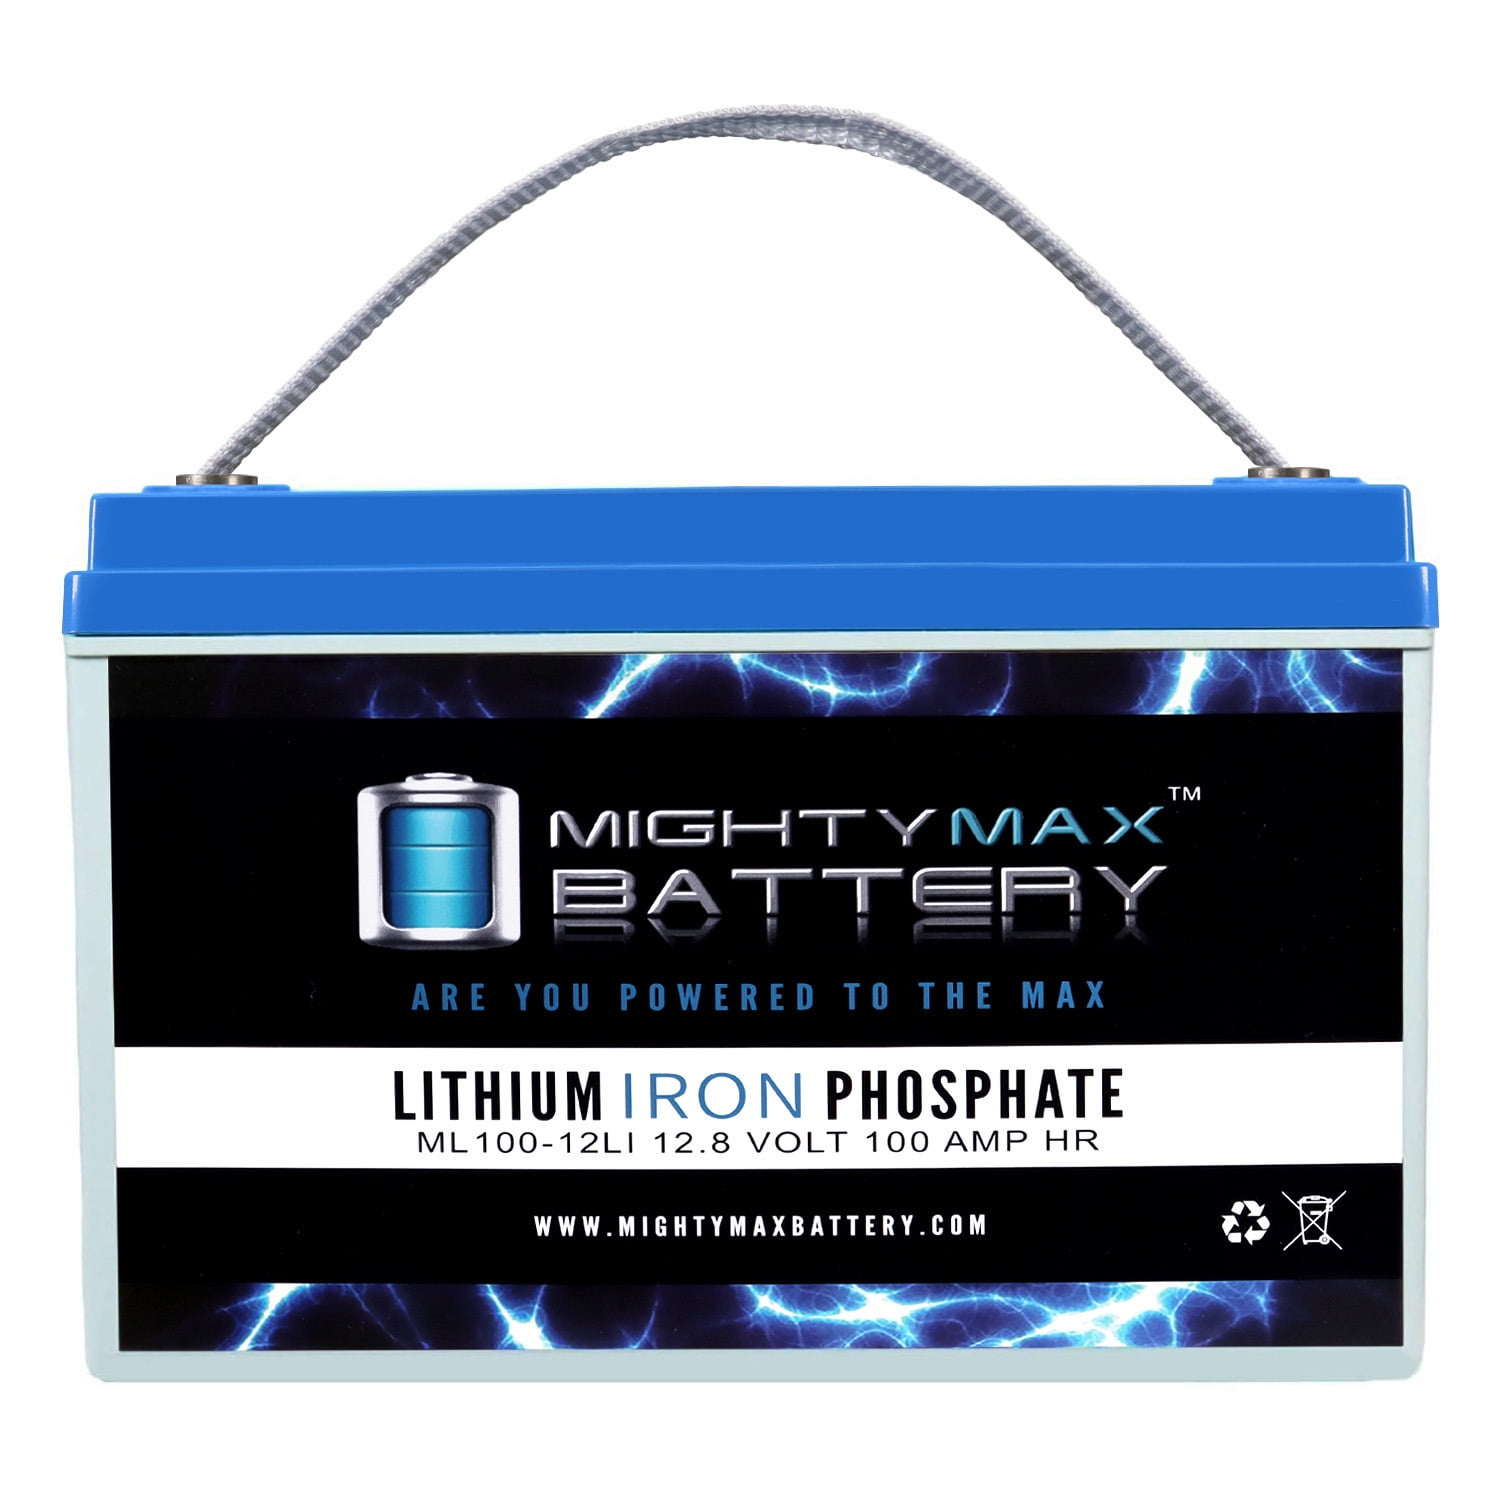  LiTime 24V 100Ah LiFePO4 Lithium Battery, Built-in 100A BMS,  4000+ Cycles Rechargeable Battery, Max. 2560W Load Power, Perfect for  RV/Camper, Solar, Marine, Overland/Van, Off-Grid Applications… : Automotive